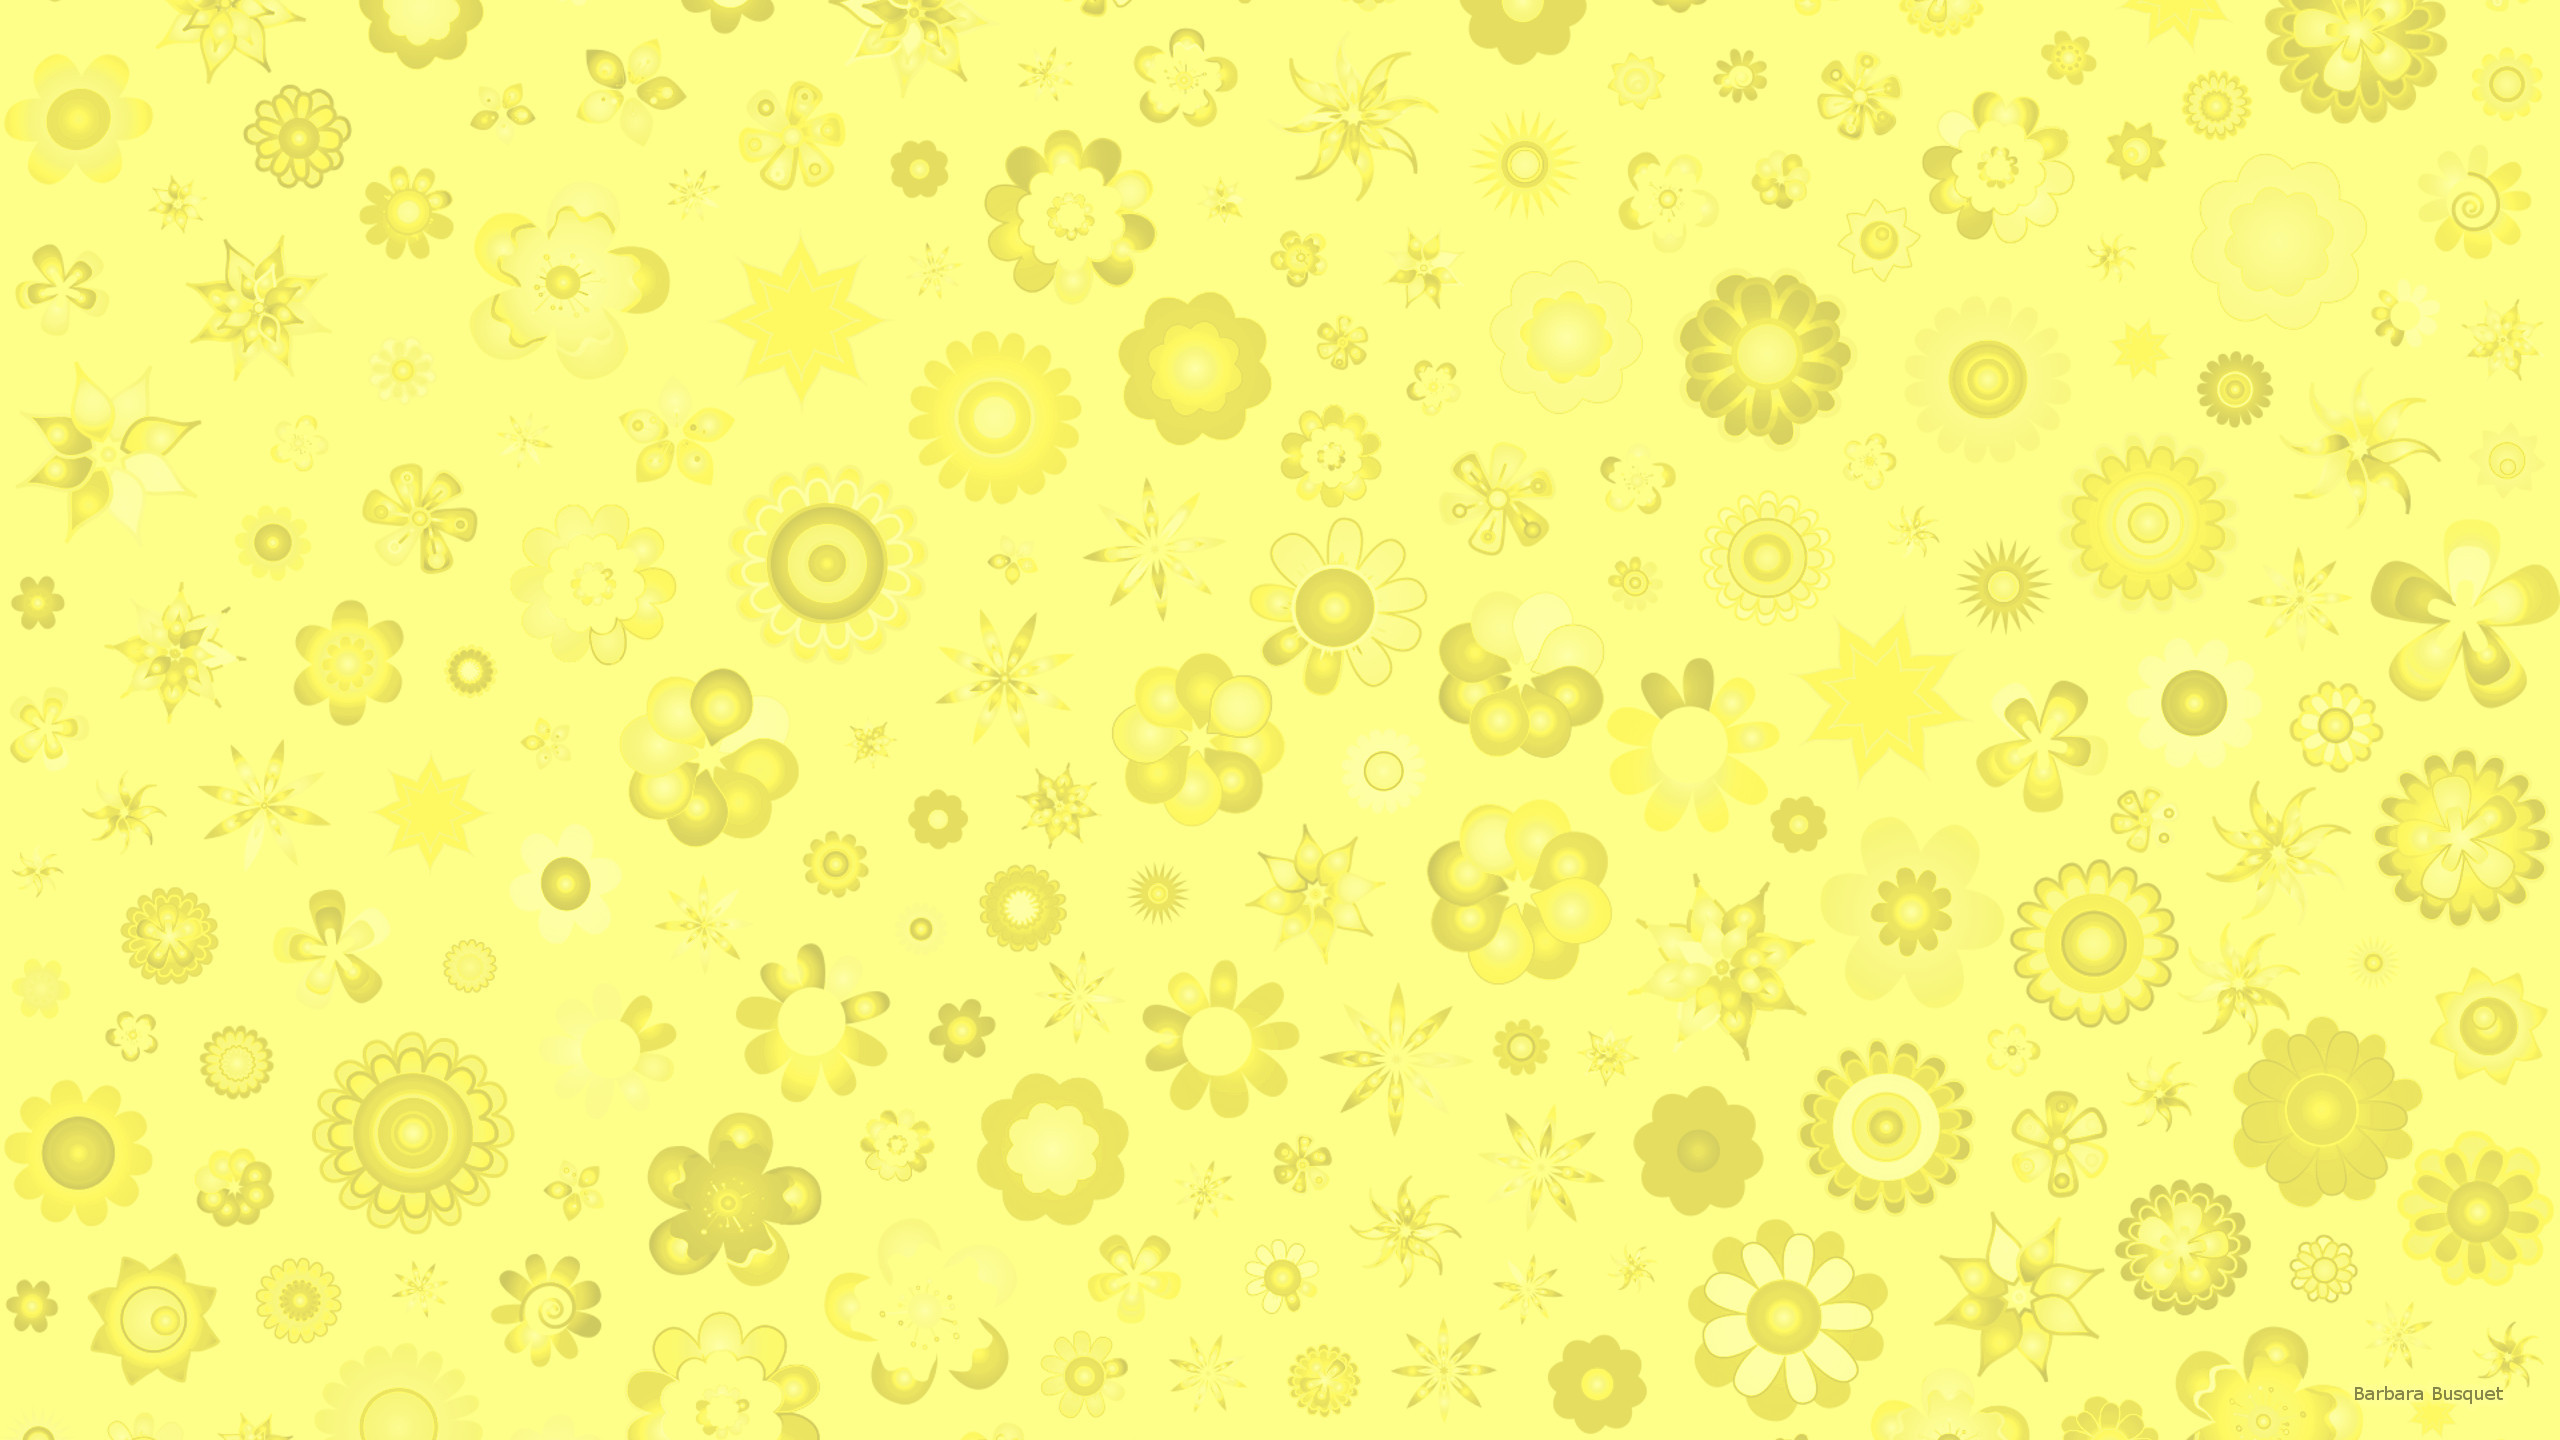 2560x1440 Light yellow wallpaper with flowers.